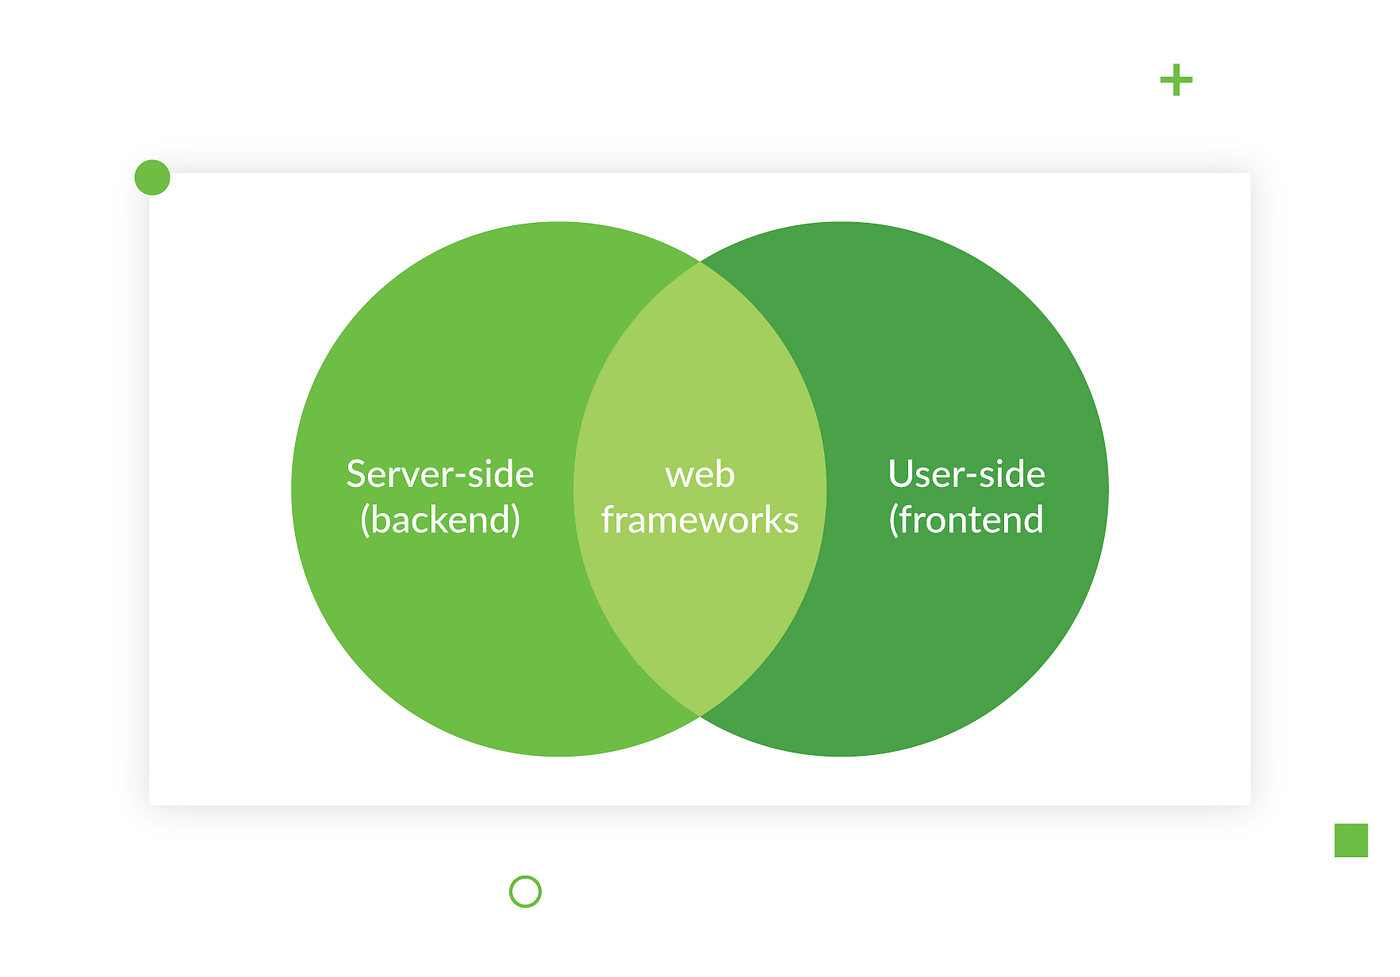 How Web Works - Web Application Architecture for Beginners - GeeksforGeeks